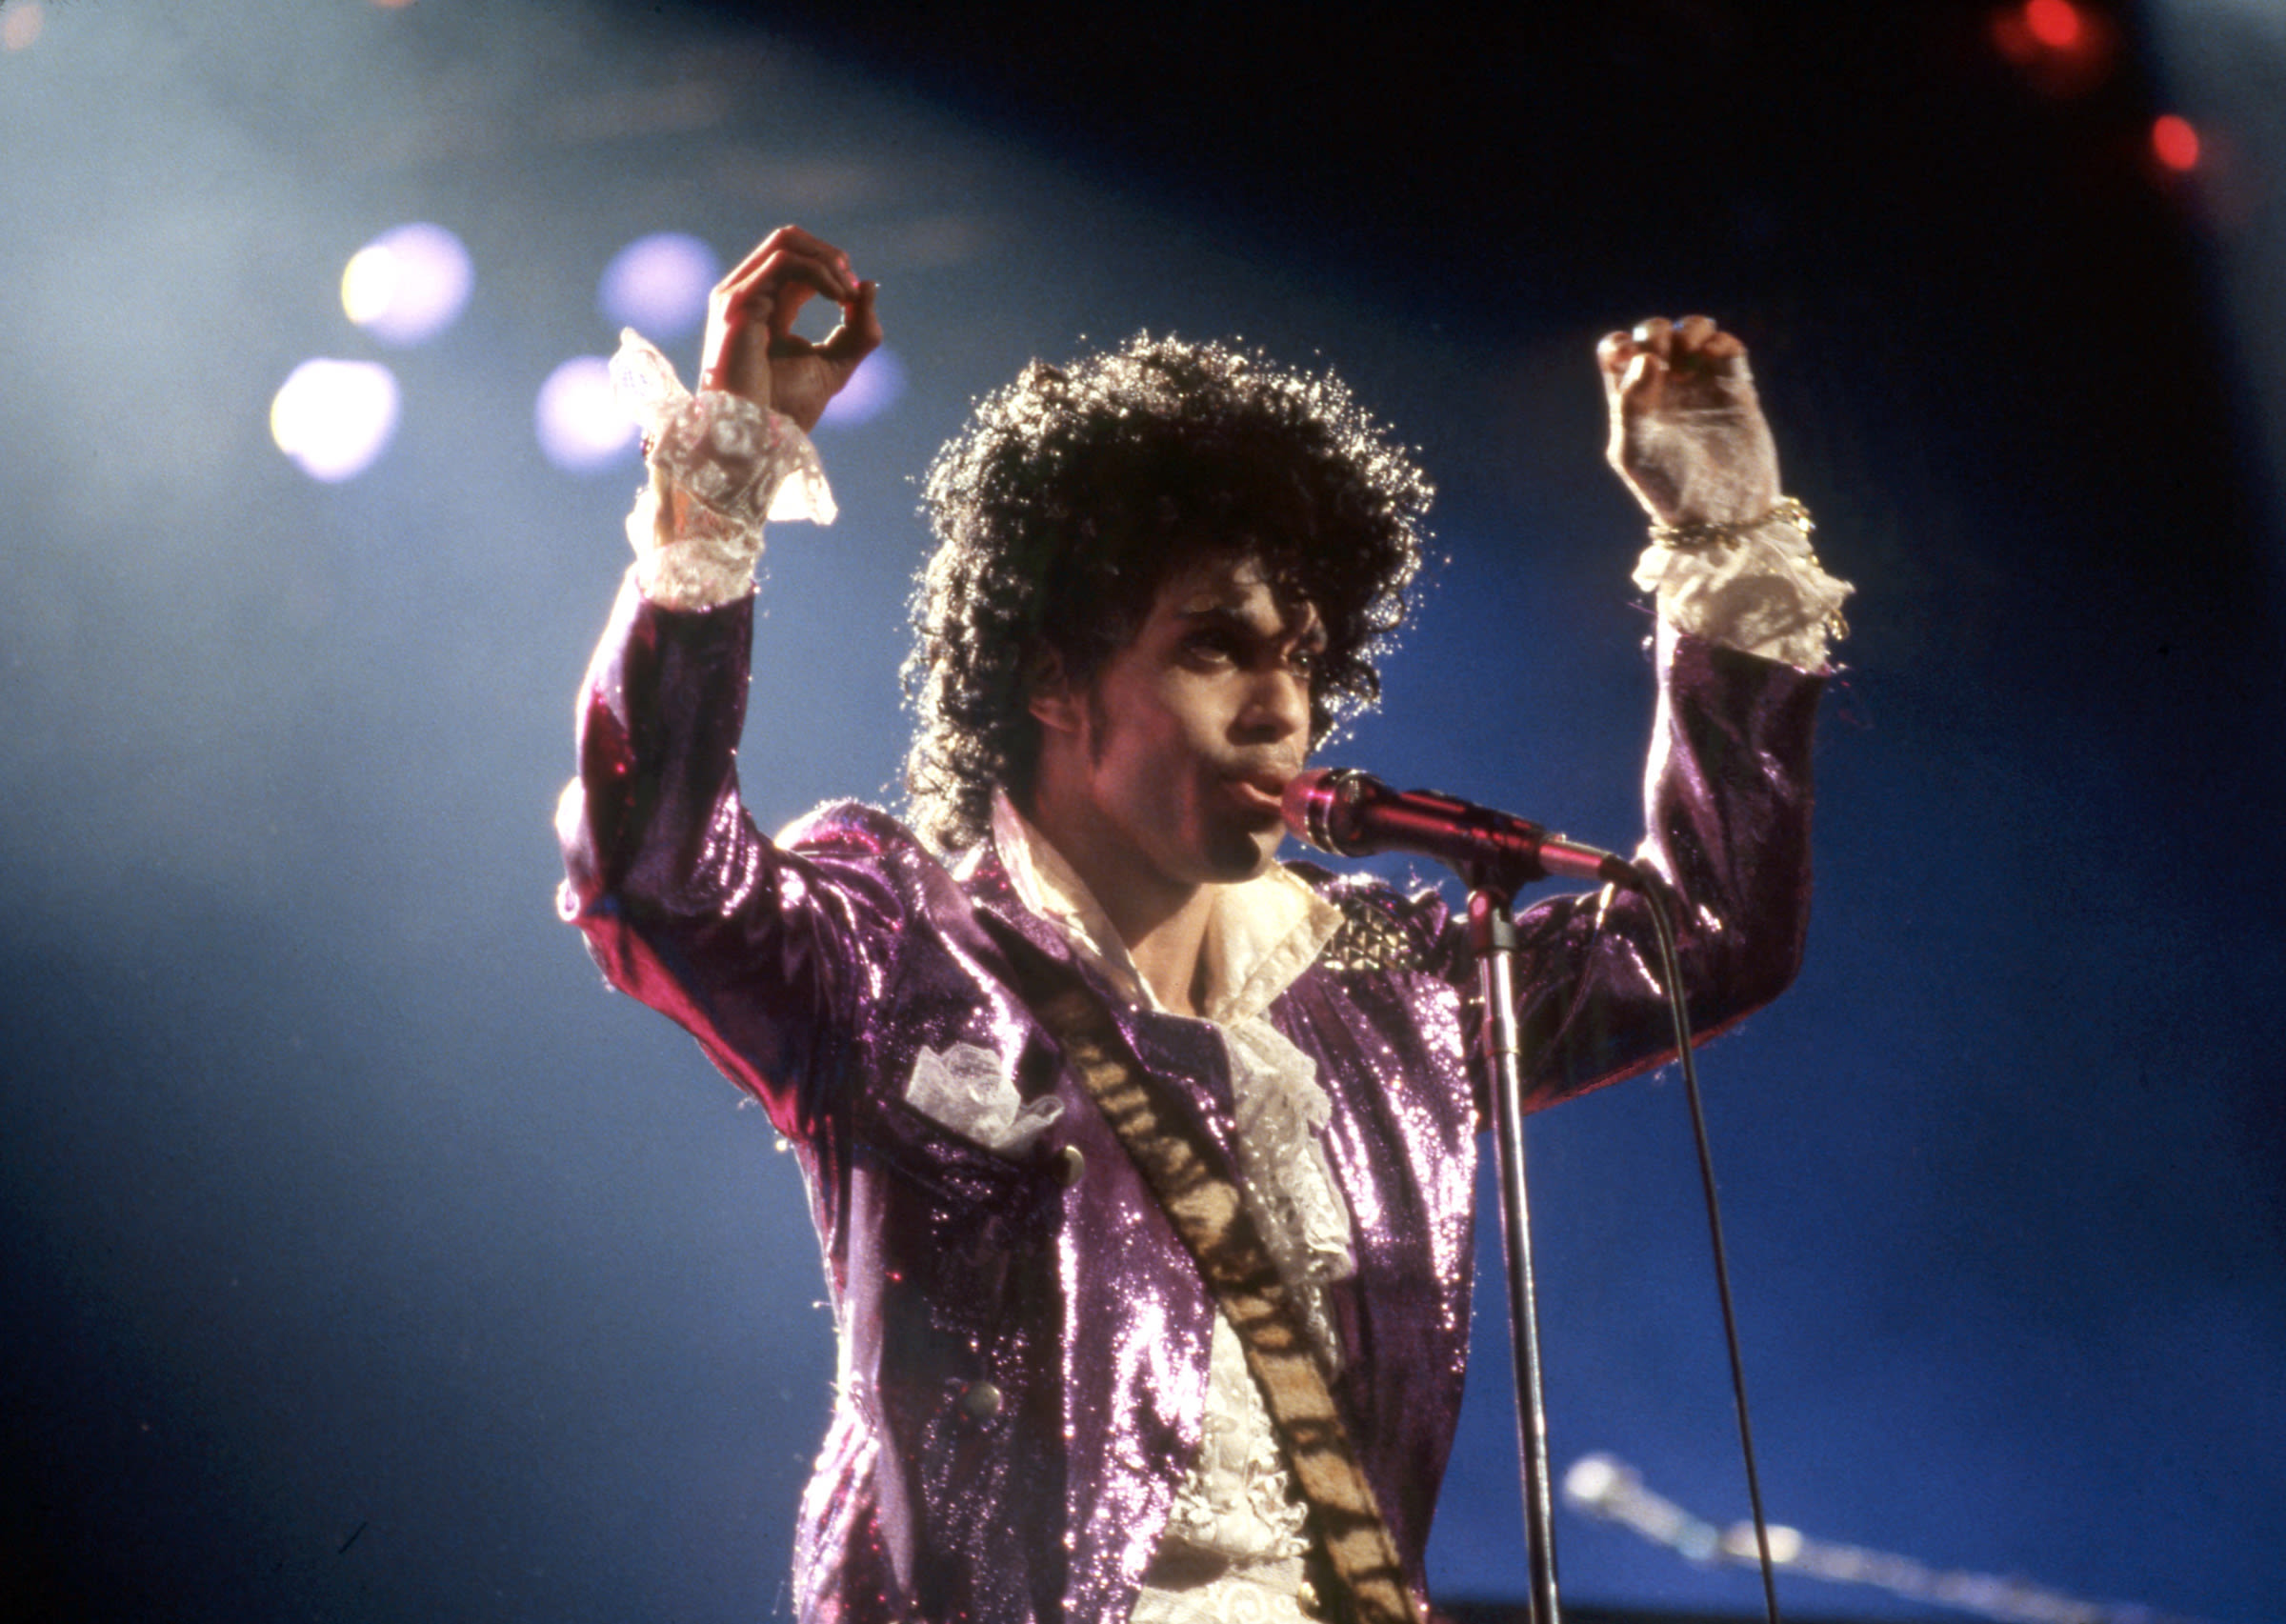 Purple Rain Book Author Recalls the ‘Playful' and 'Soft-Spoken’ Side of Prince - SPIN